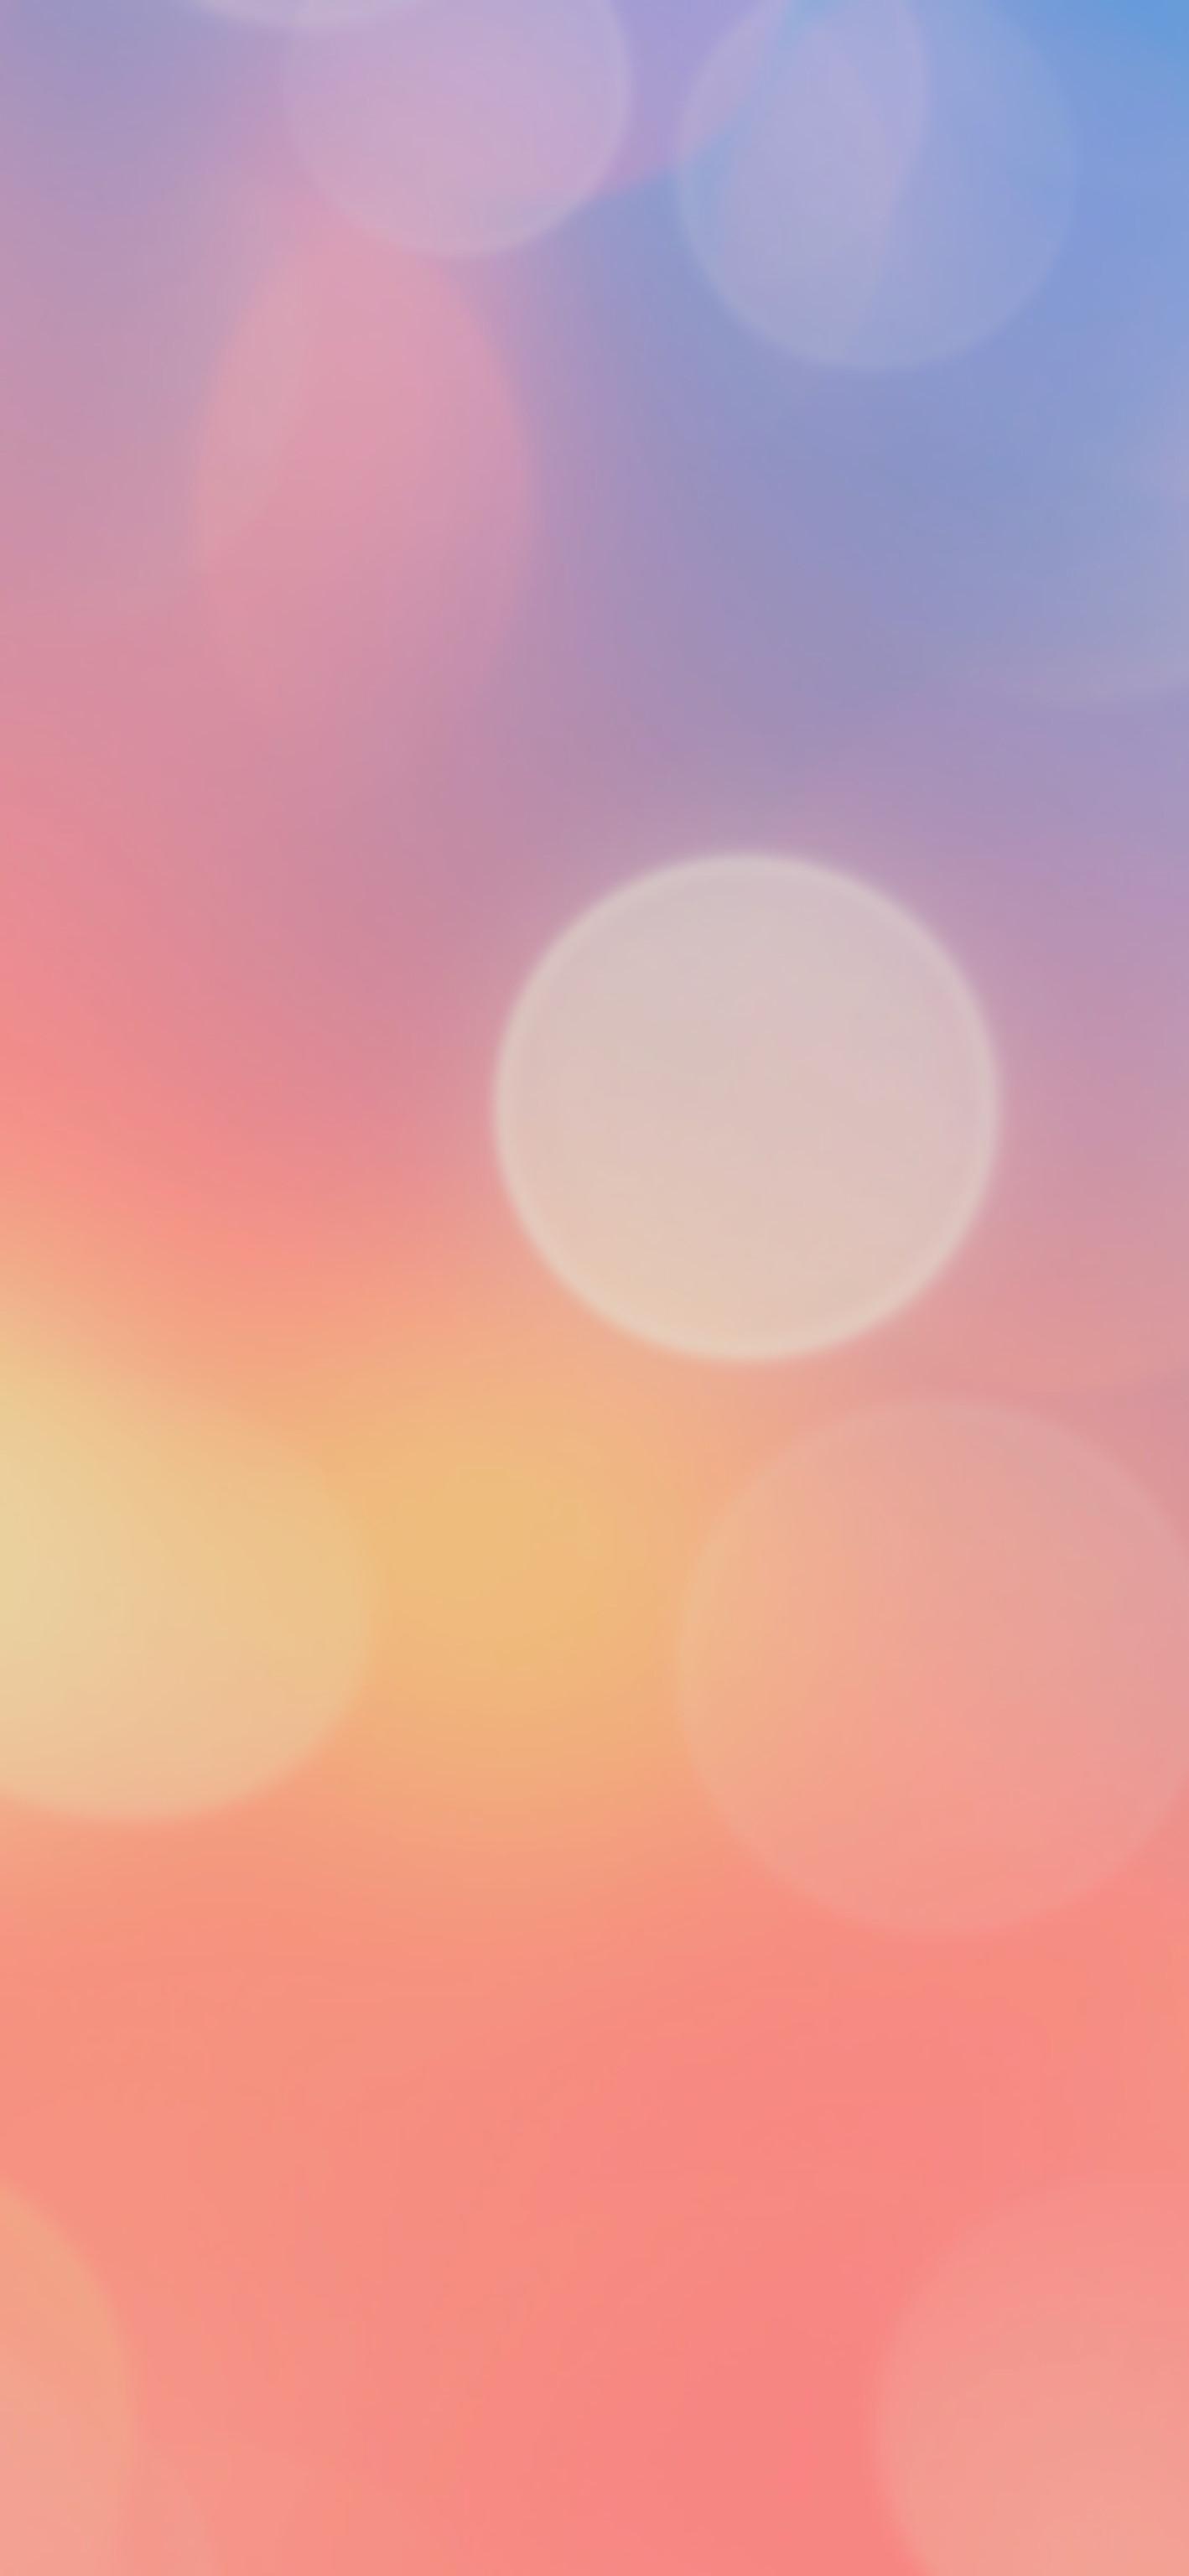 A bokeh gradient wallpaper I made for the iPhone X home screen. Enjoy